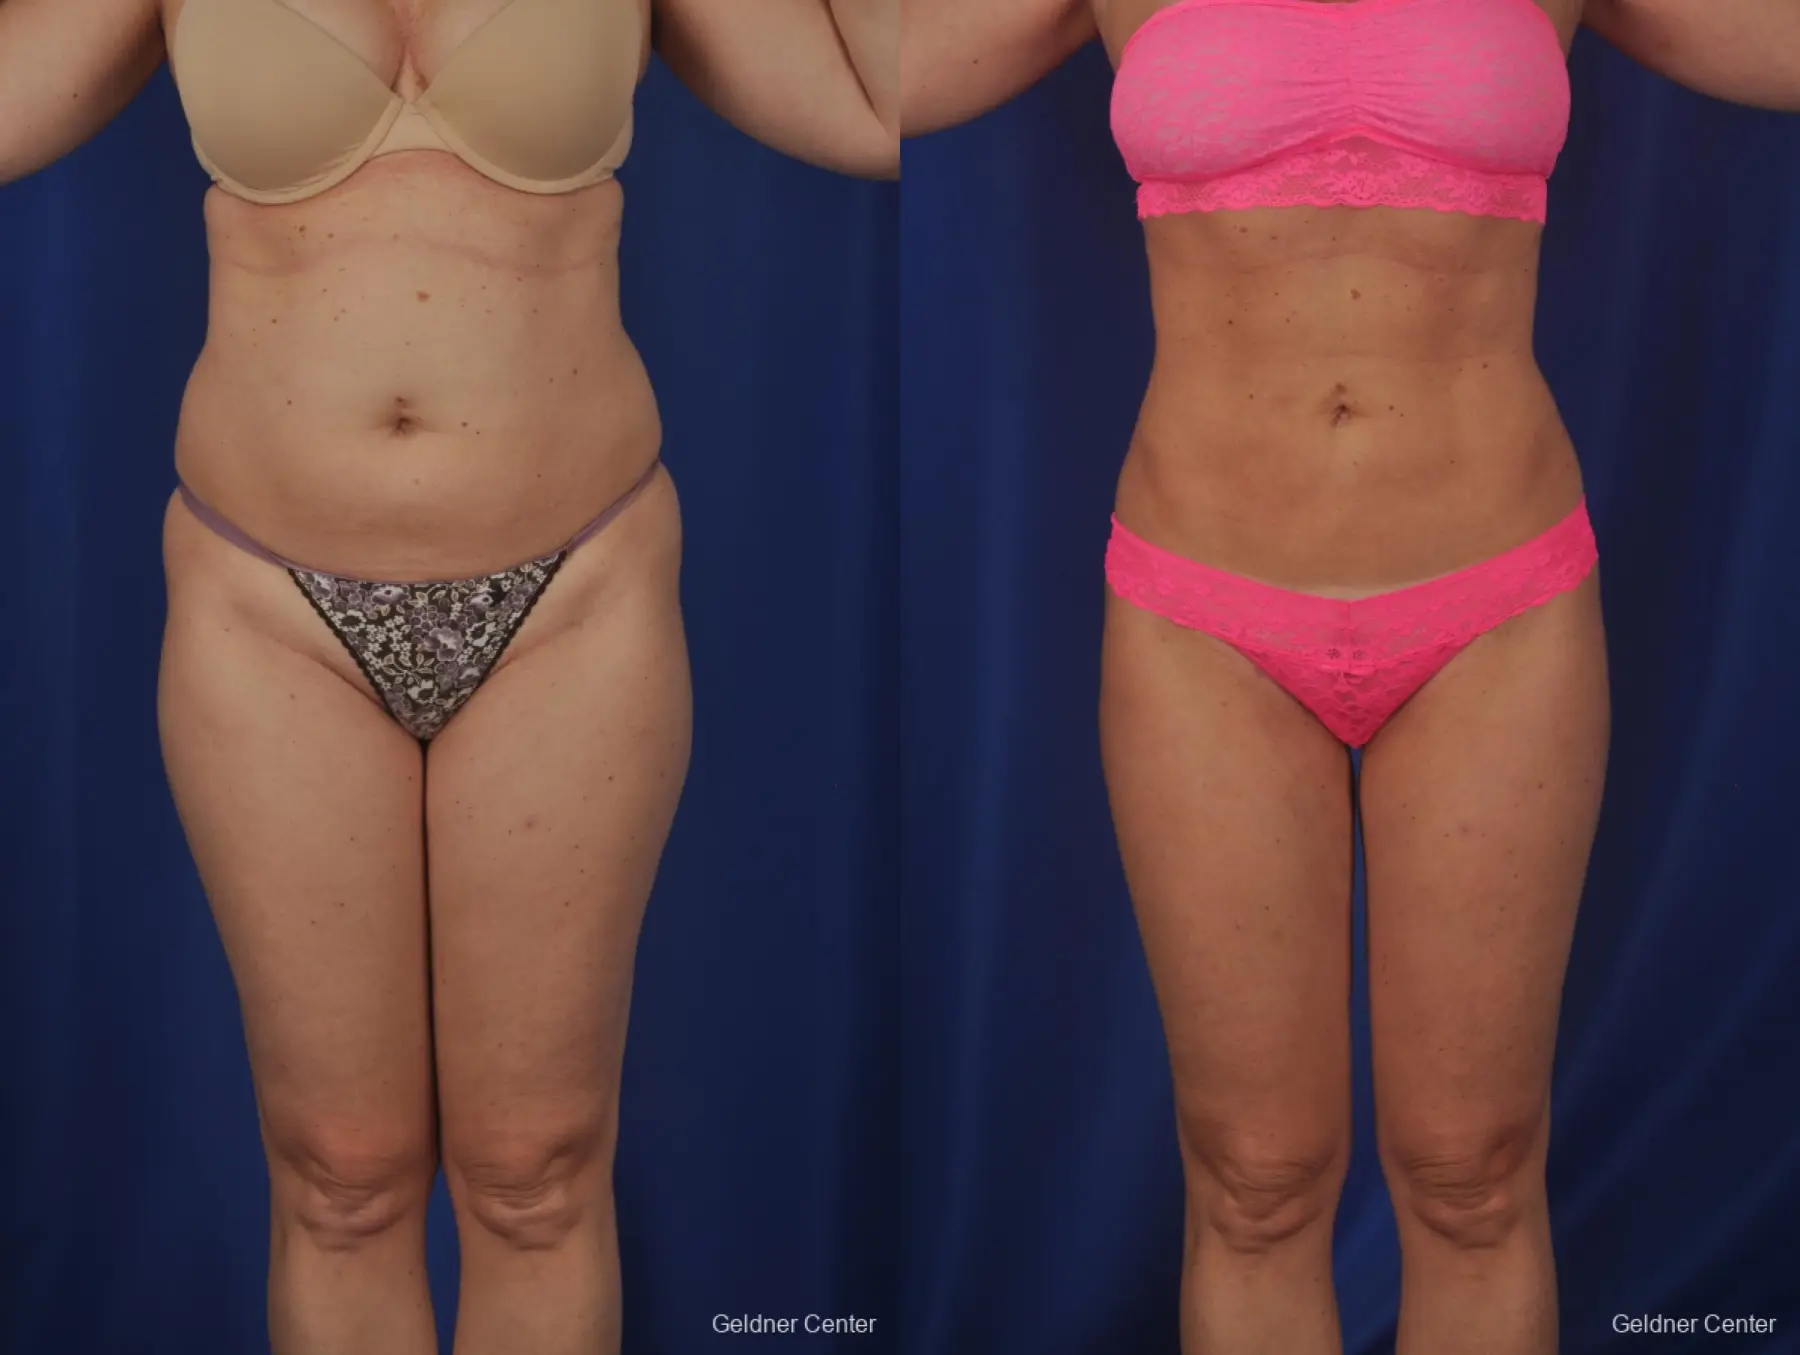 Vaser lipo patient 2069 before and after photos - Before and After